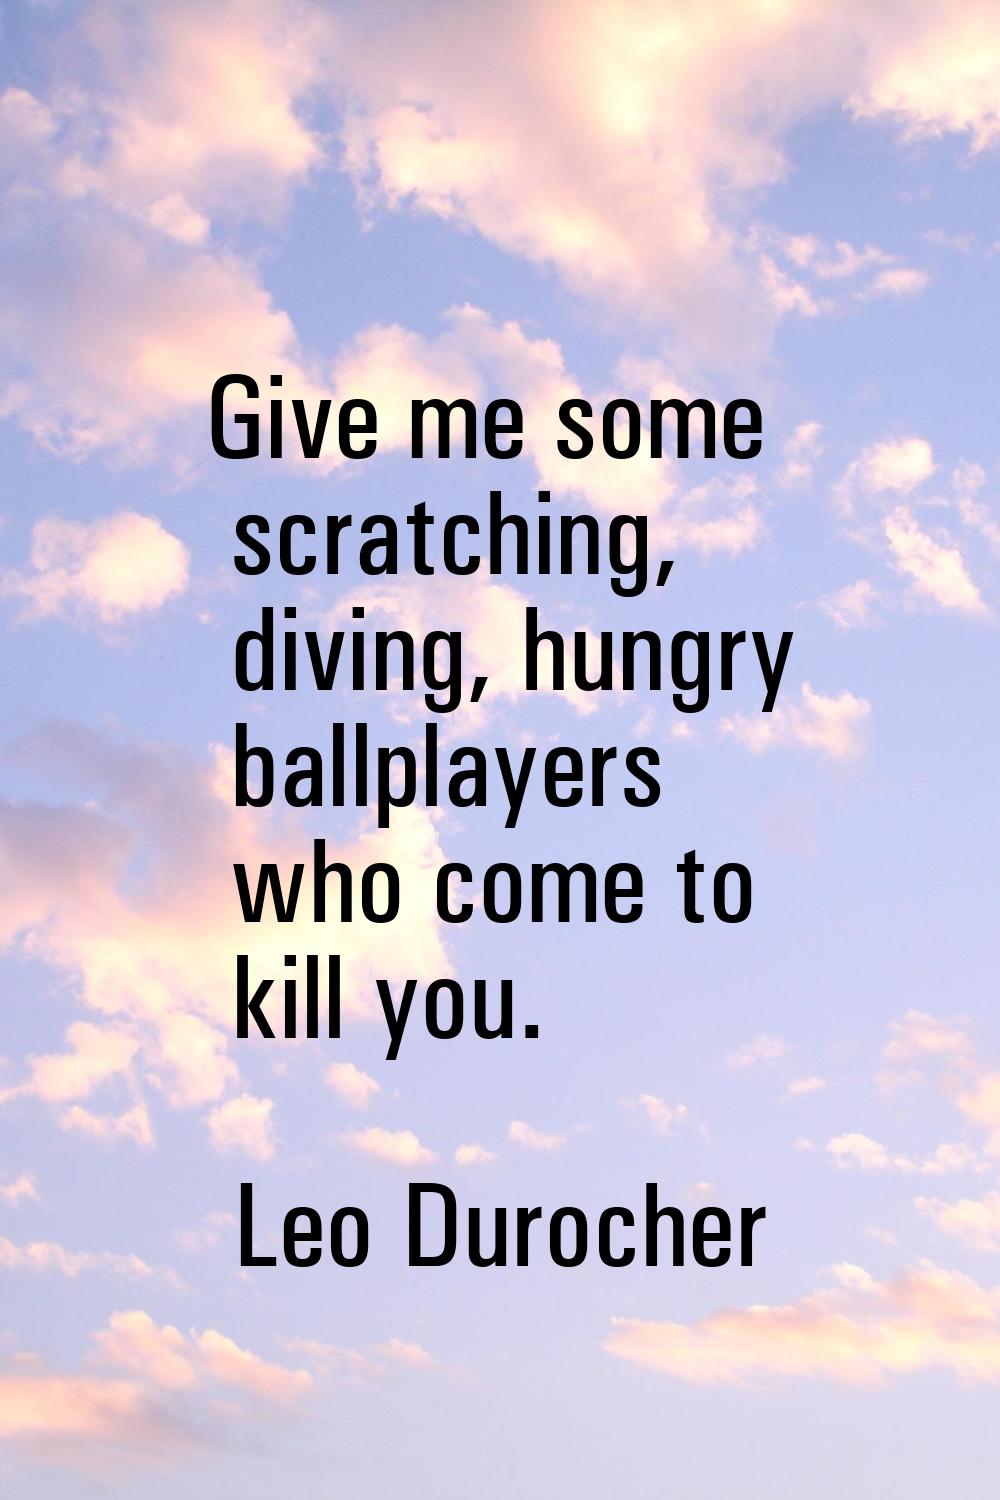 Give me some scratching, diving, hungry ballplayers who come to kill you.